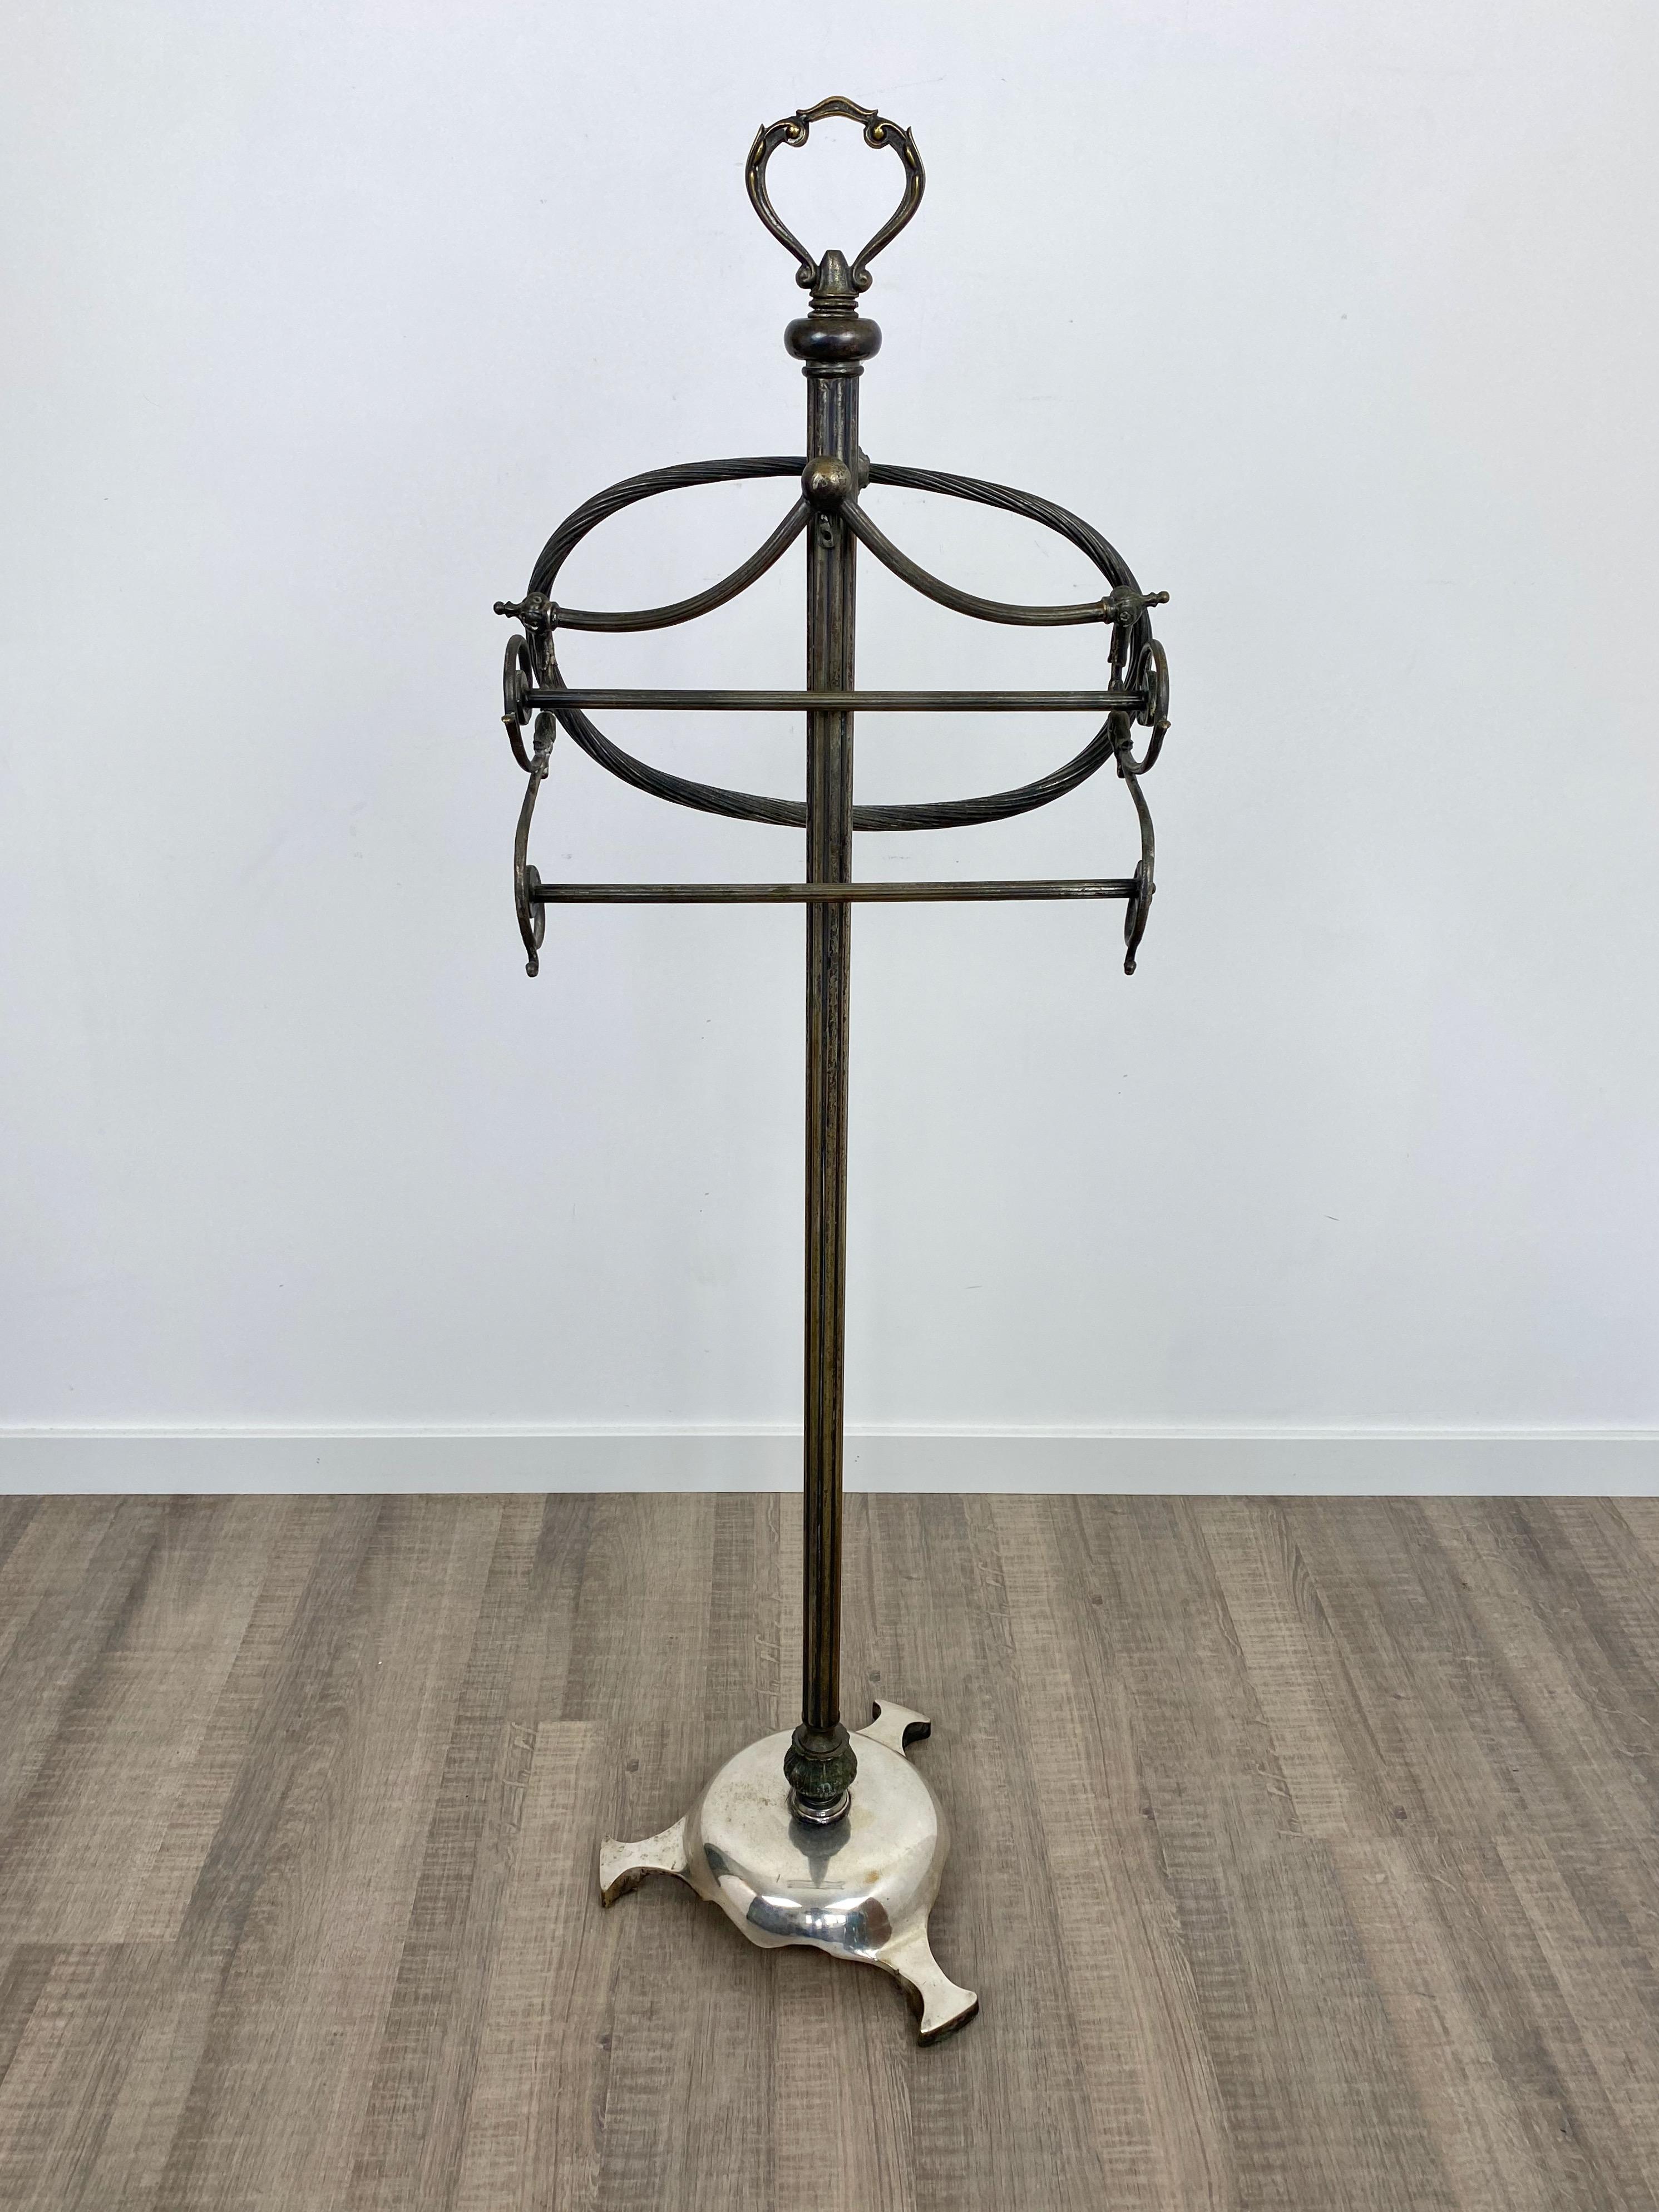 Midcentury Solid Silver Brass Italian Towel Floor Holder Rack, 1950s In Good Condition For Sale In Rome, IT